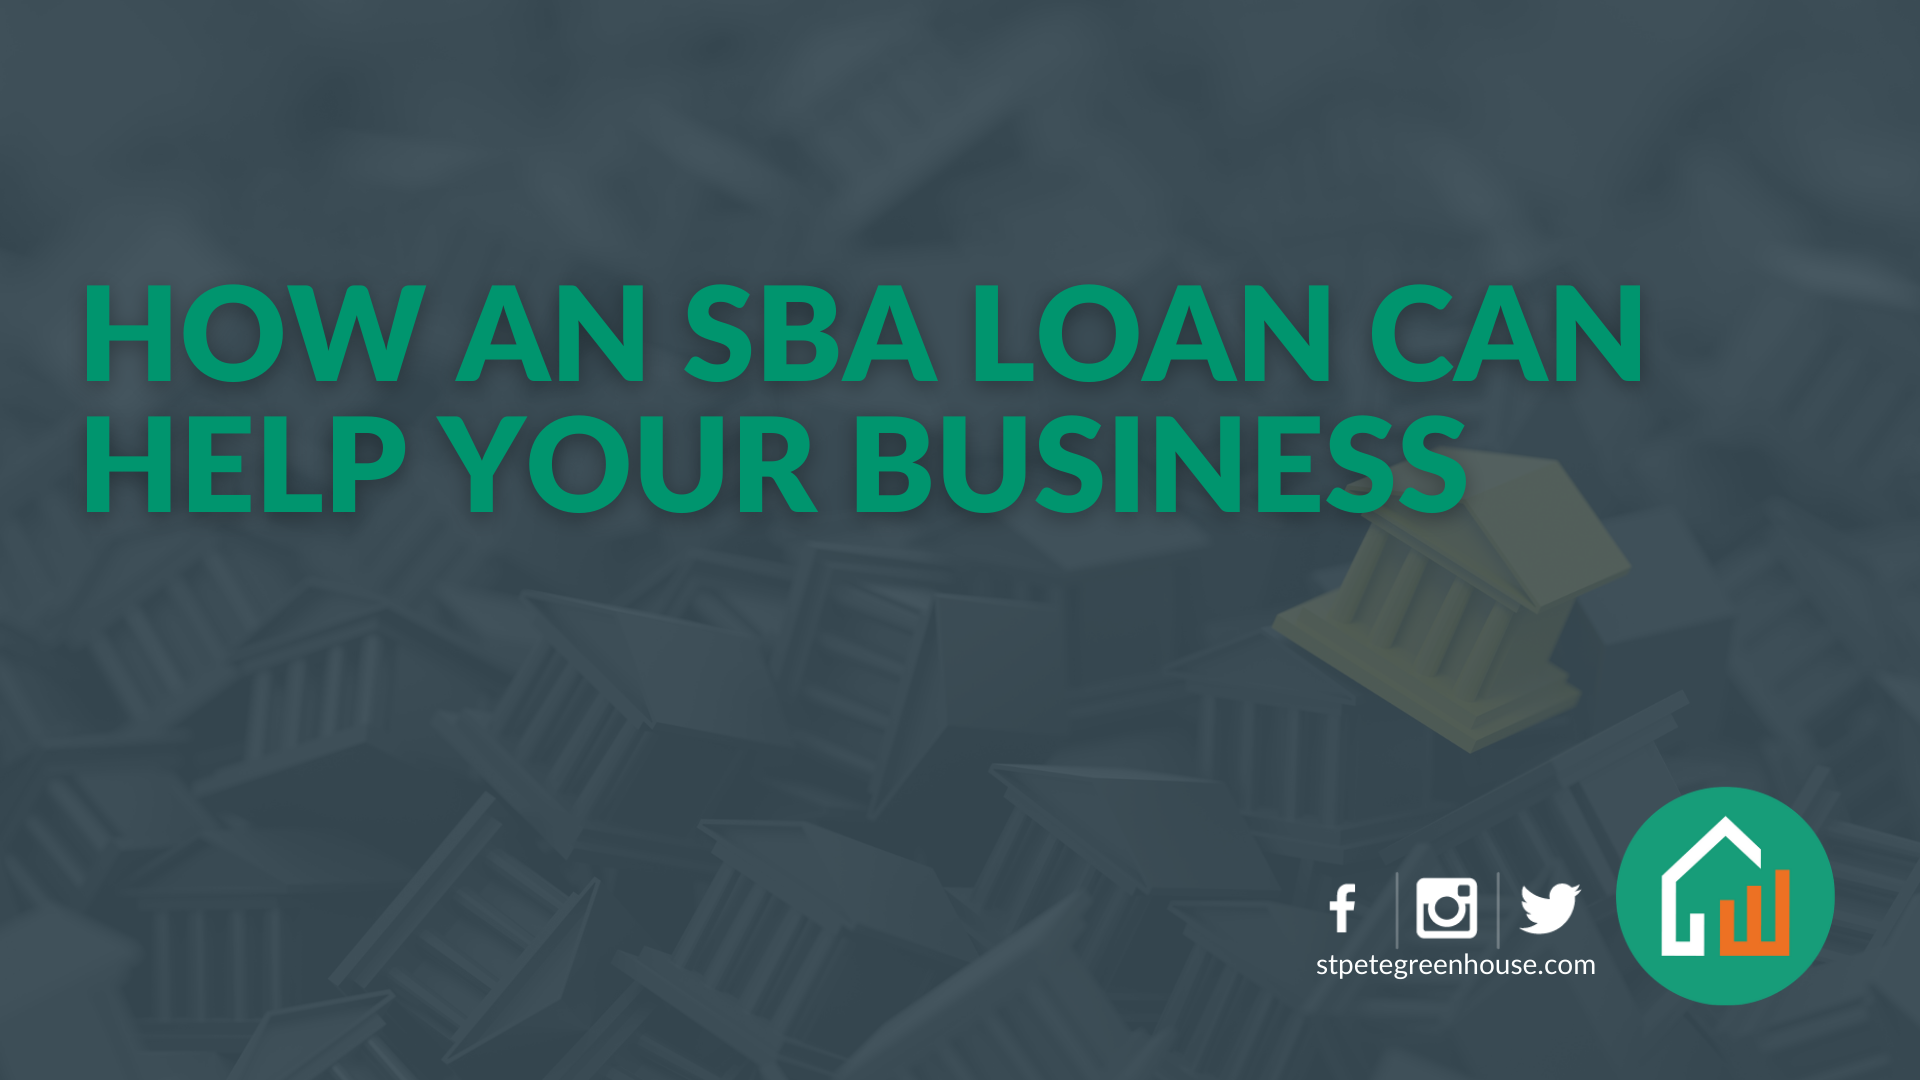 How an SBA Loan Can Help Your Business main image